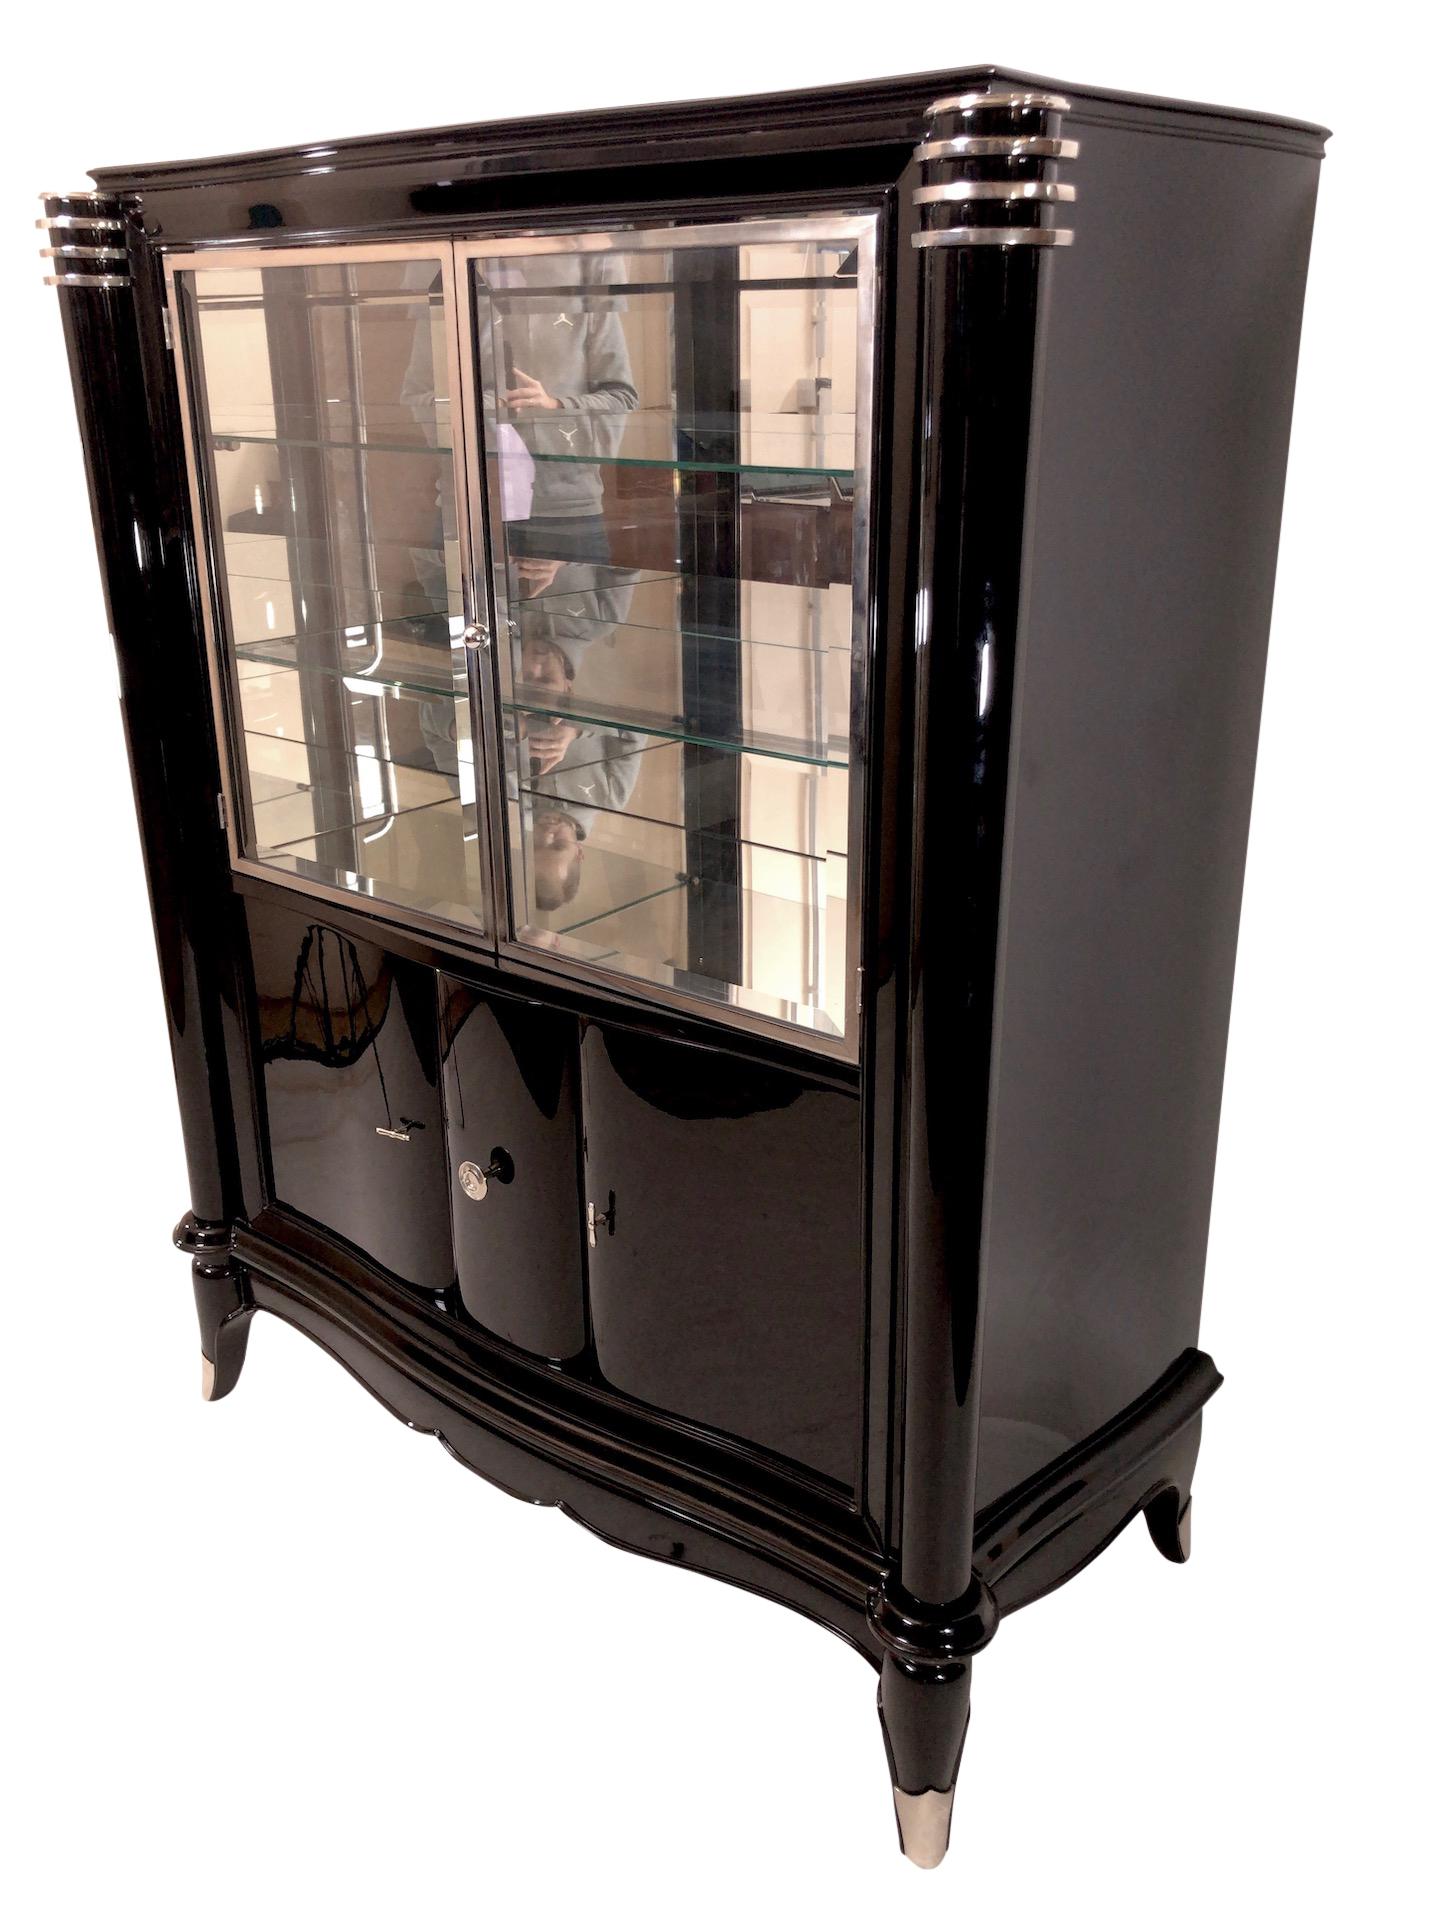 1930s Black Piano Lacquer Vitrine with Dry Bar Original French Art Deco In Good Condition For Sale In Baden-Baden, Baden-Württemberg